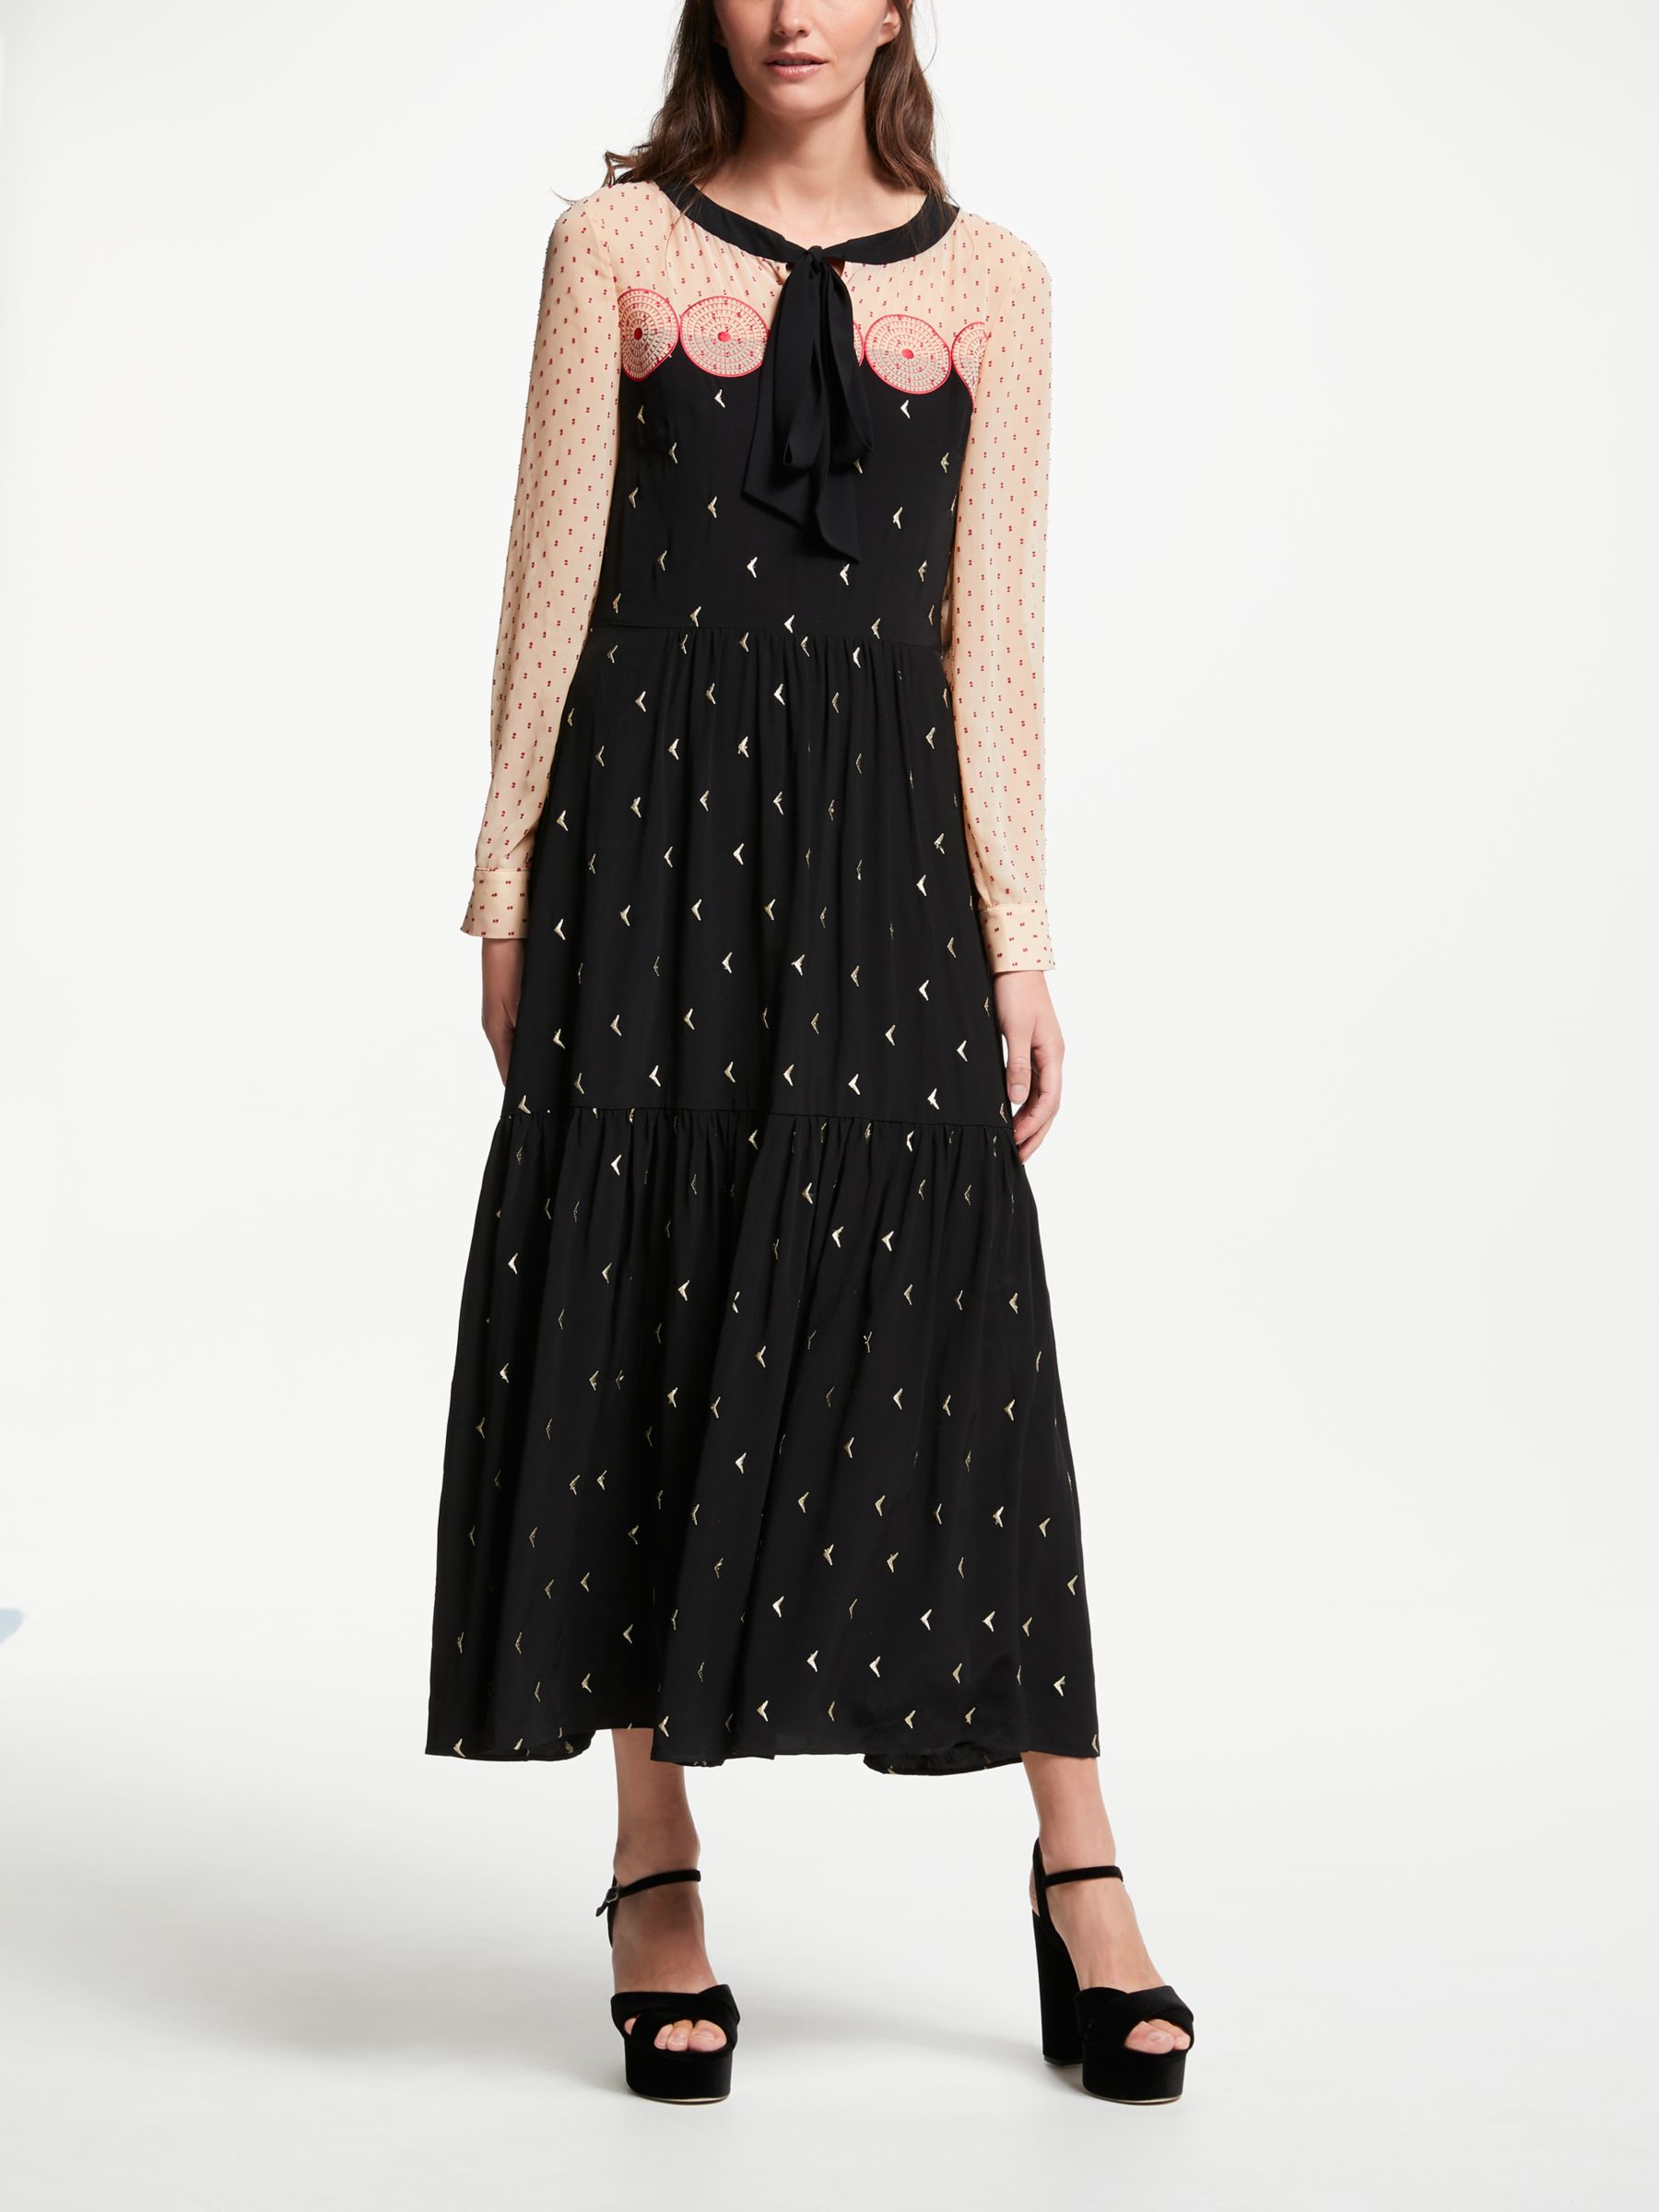 Somerset by Alice Temperley Embroidered Long Sleeve Maxi Dress, Black at John Lewis & Partners